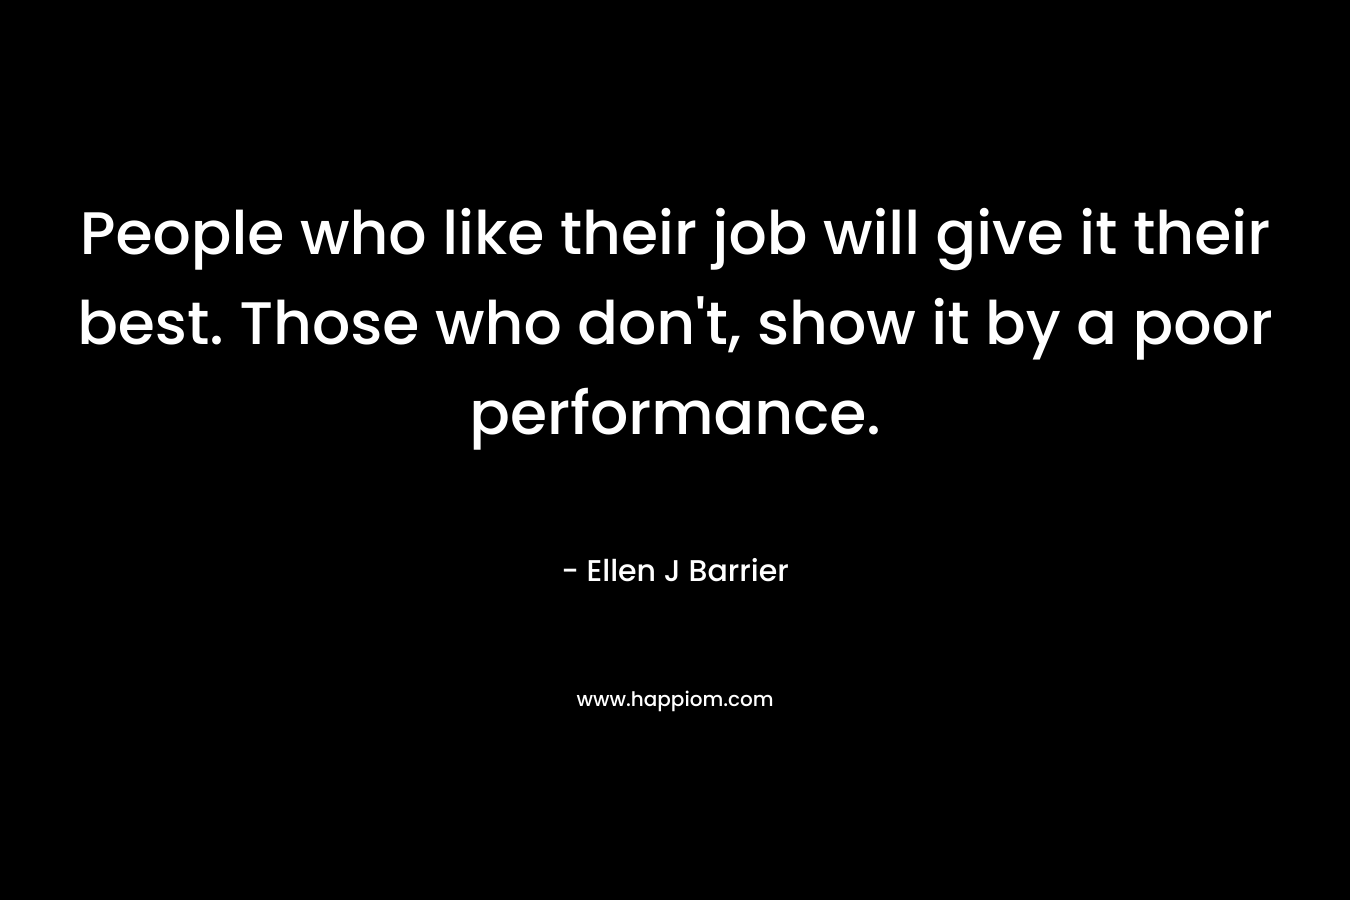 People who like their job will give it their best. Those who don't, show it by a poor performance.